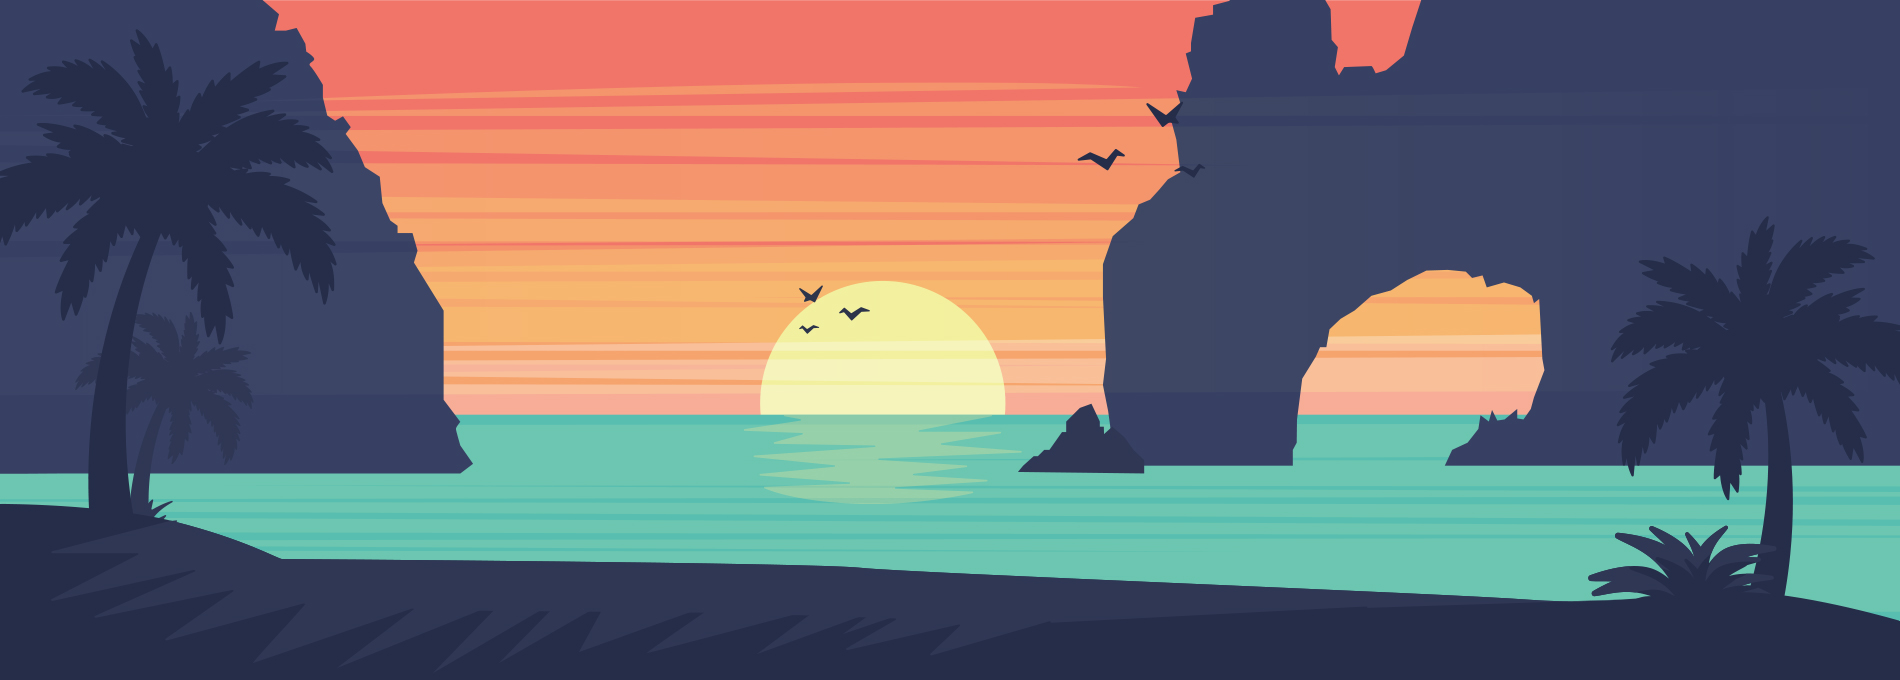 Illustration of a Los Cabos sunset